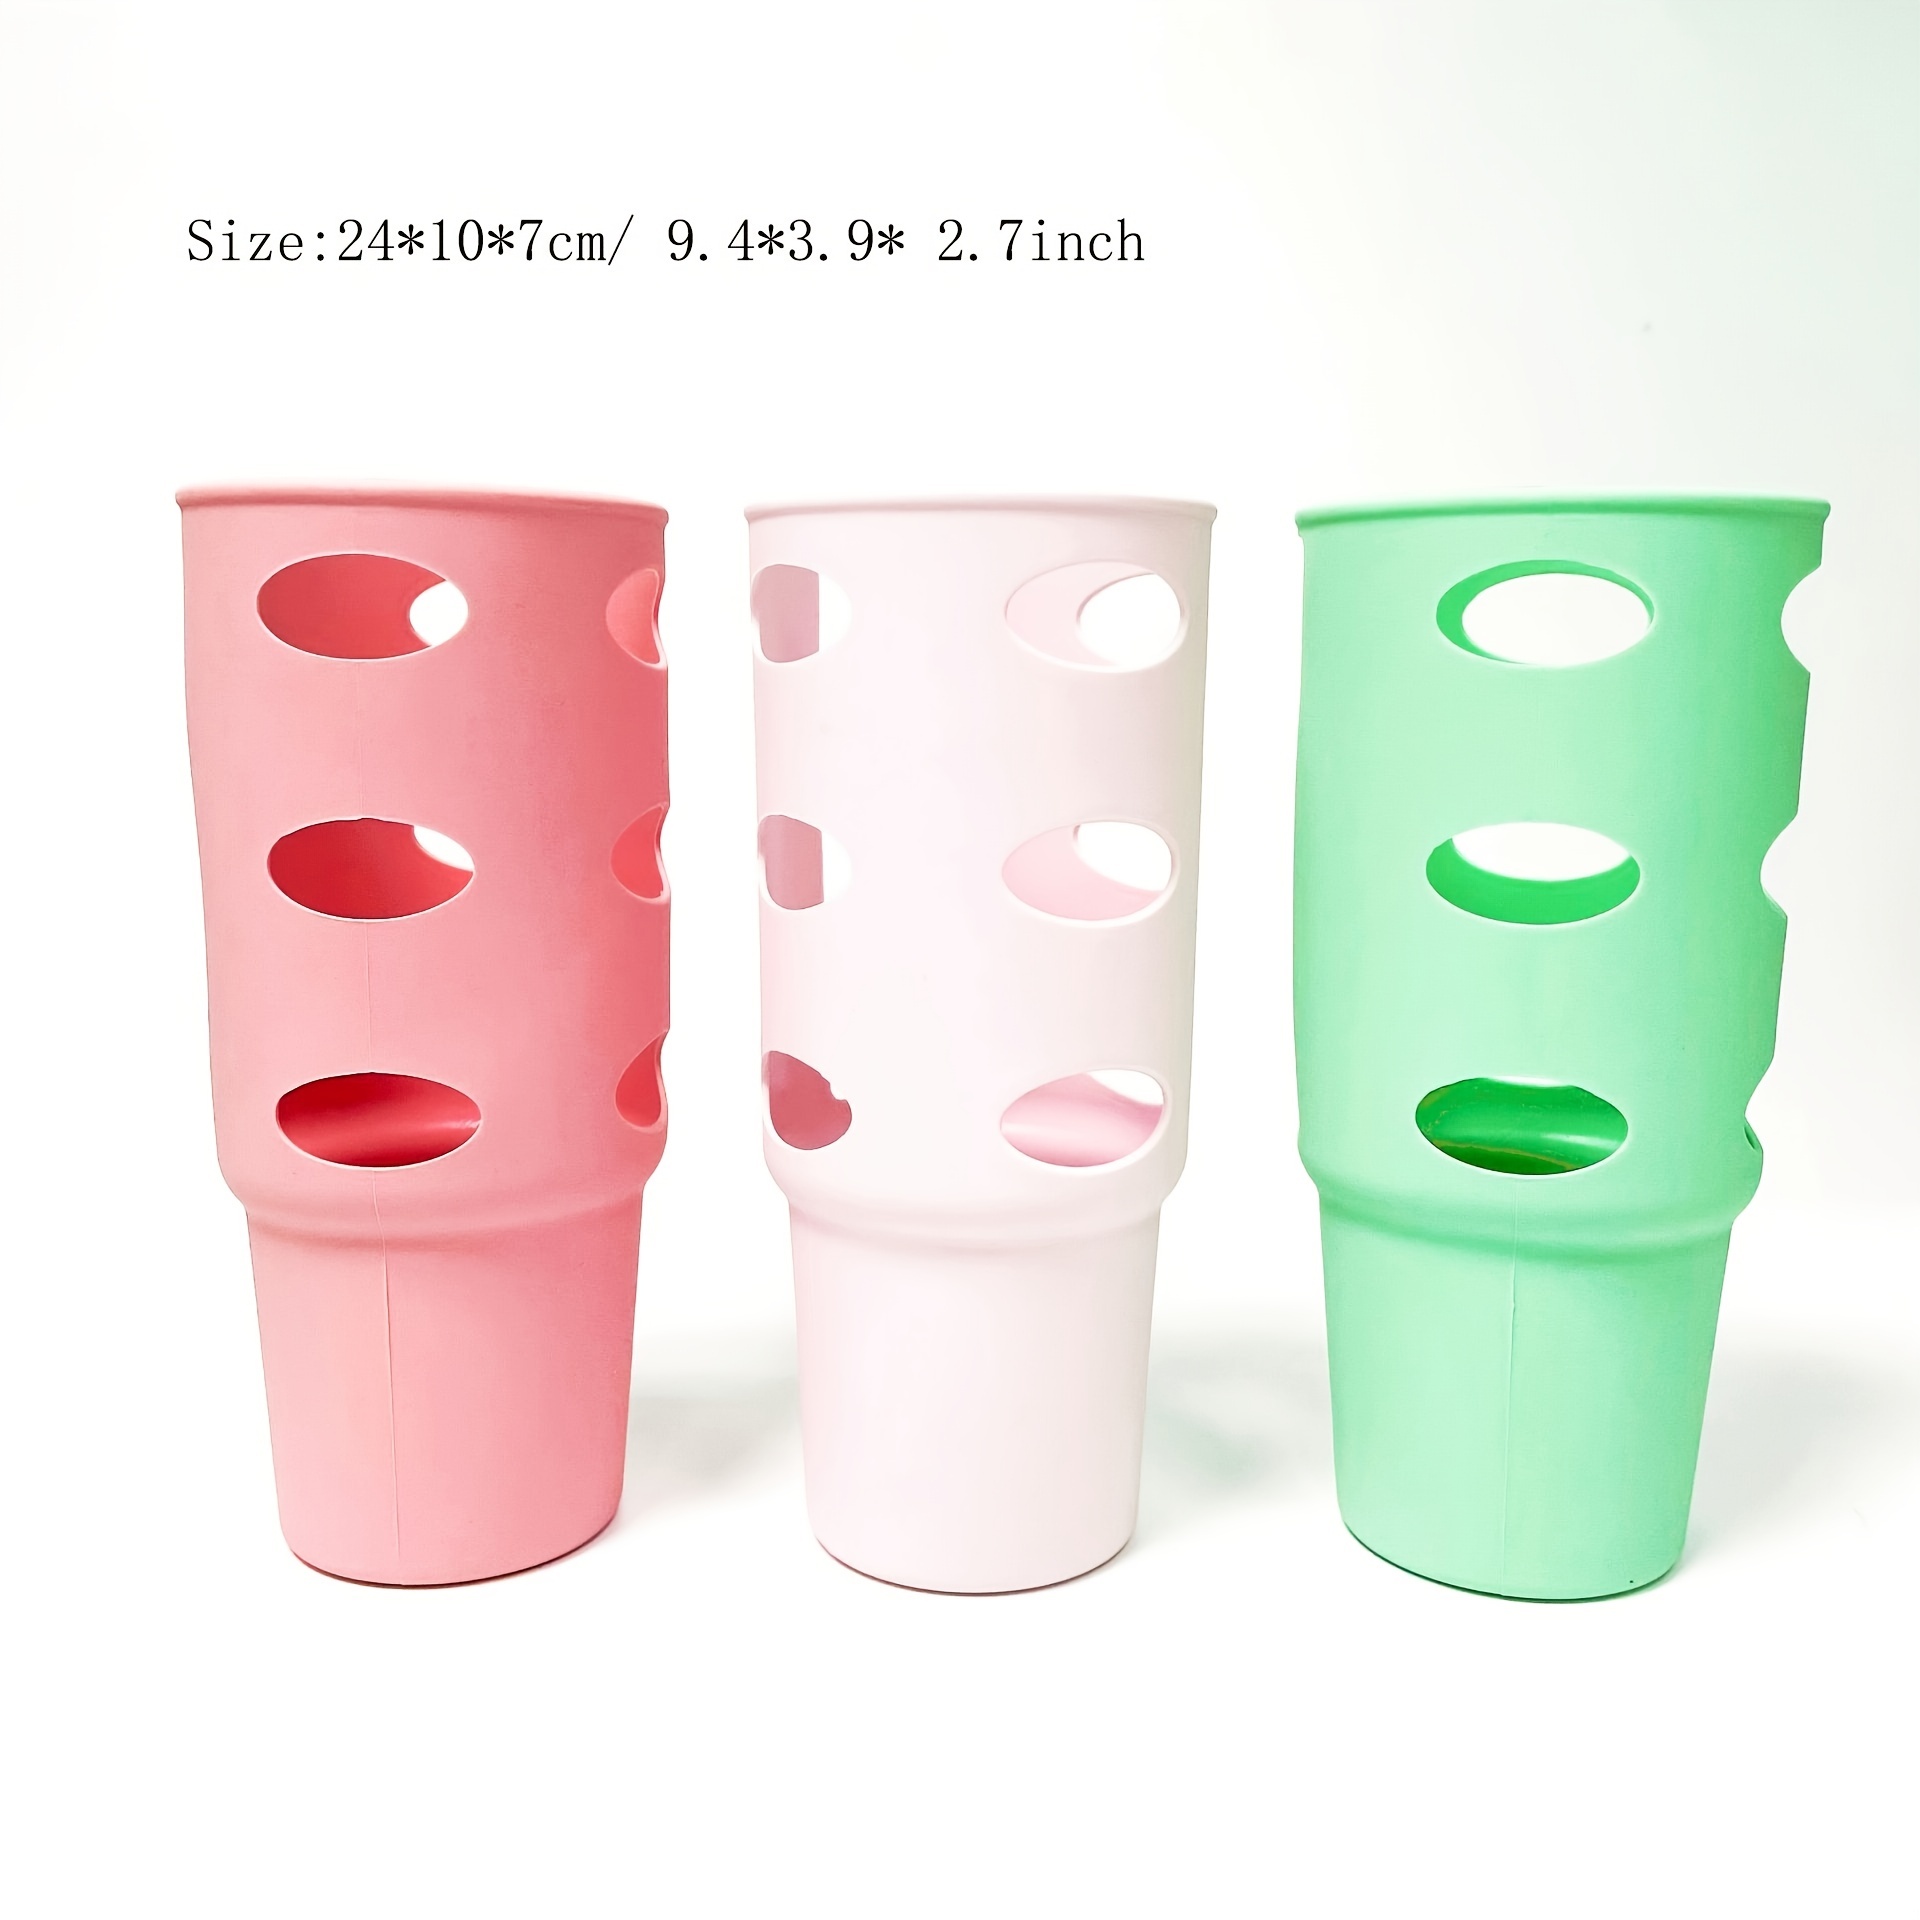 Dropship 1pc Creative Silicone Cup Cover With Leak-proof And